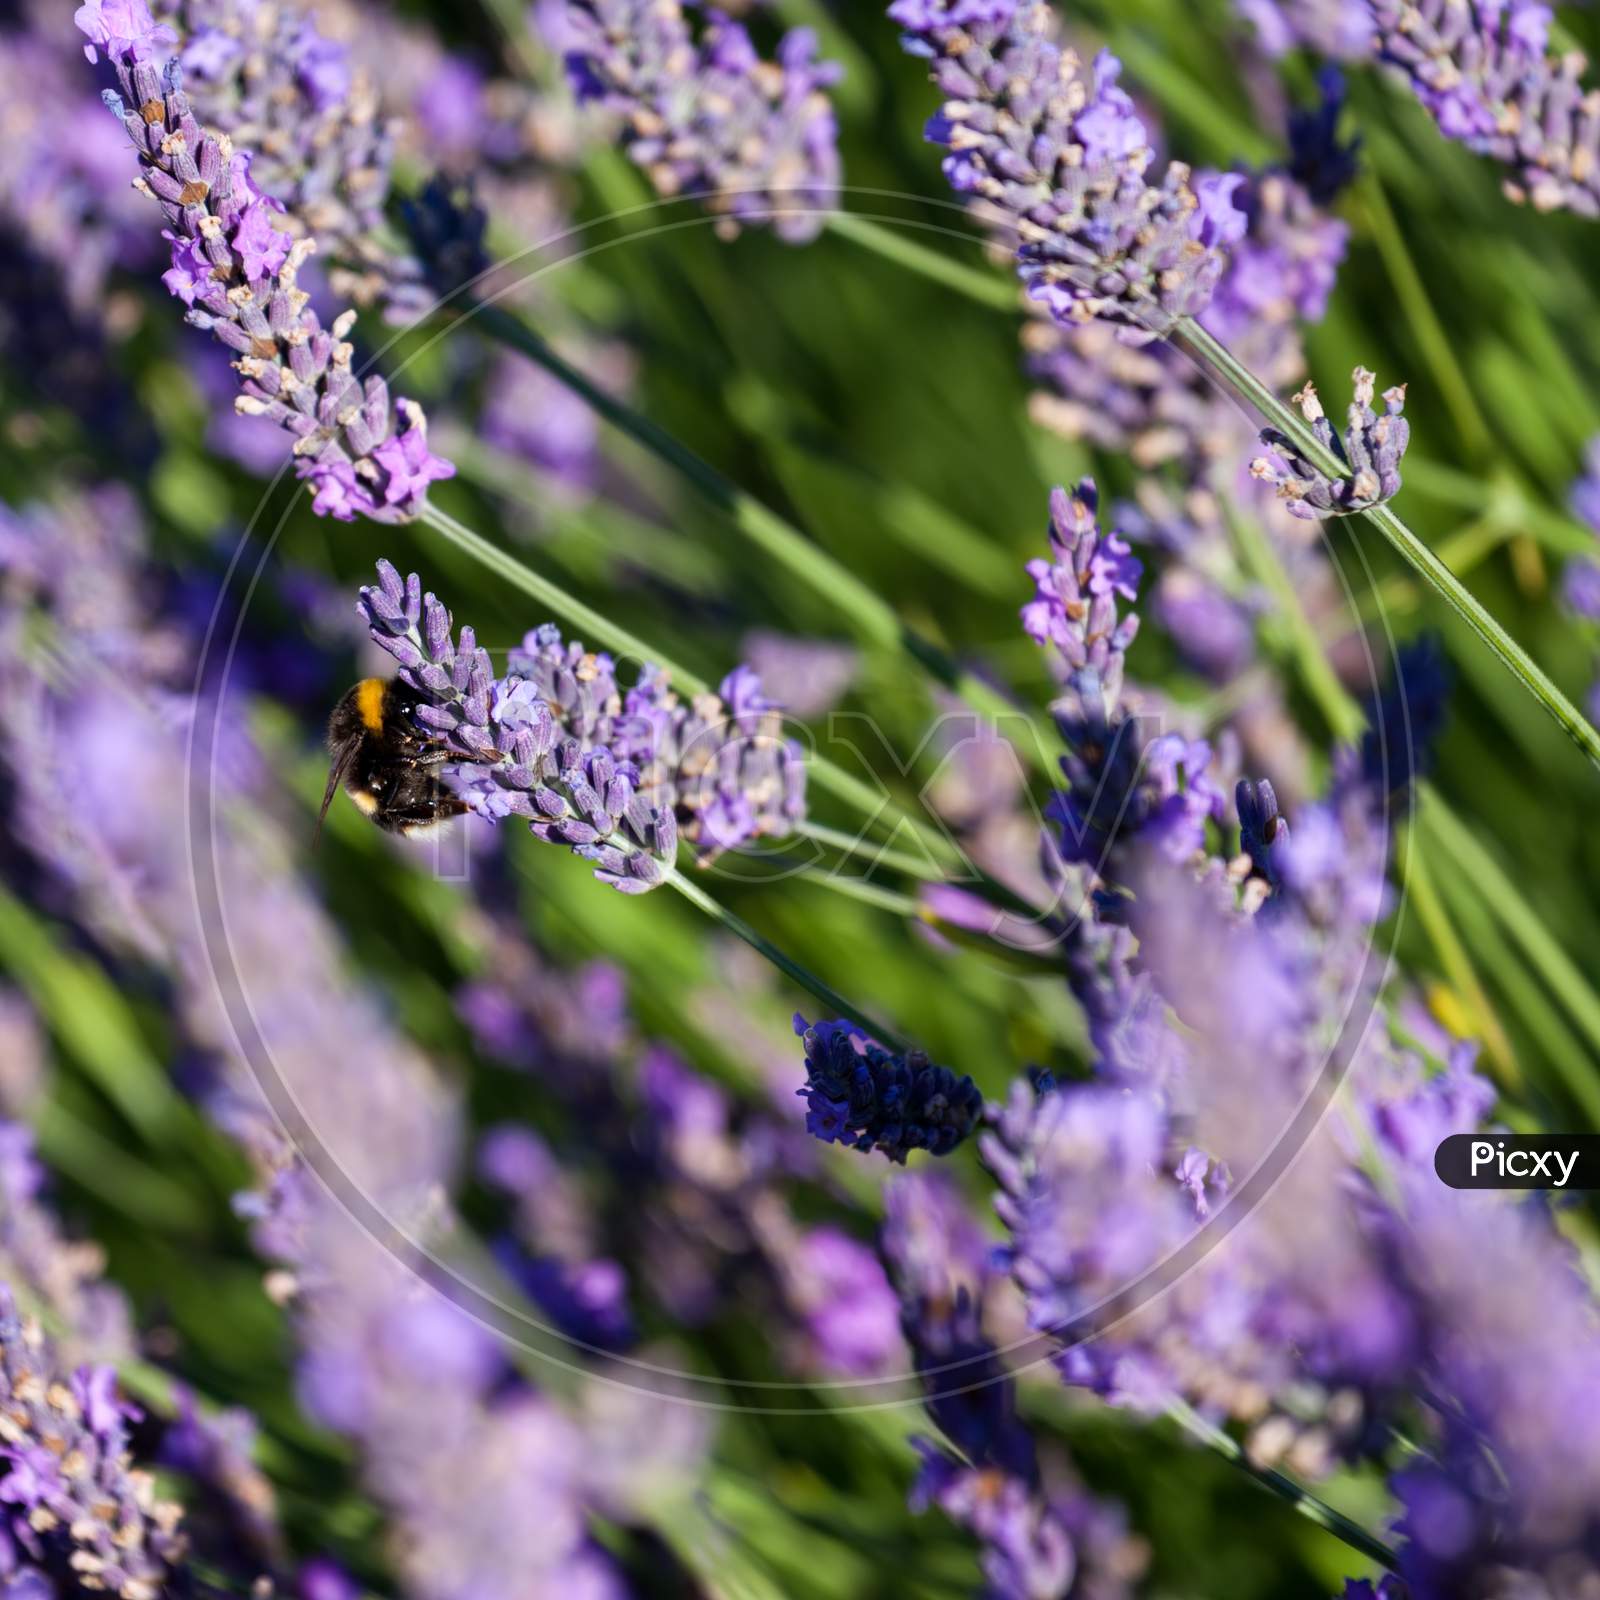 Bumble Bee Collecting Pollen From Lavender Flowers